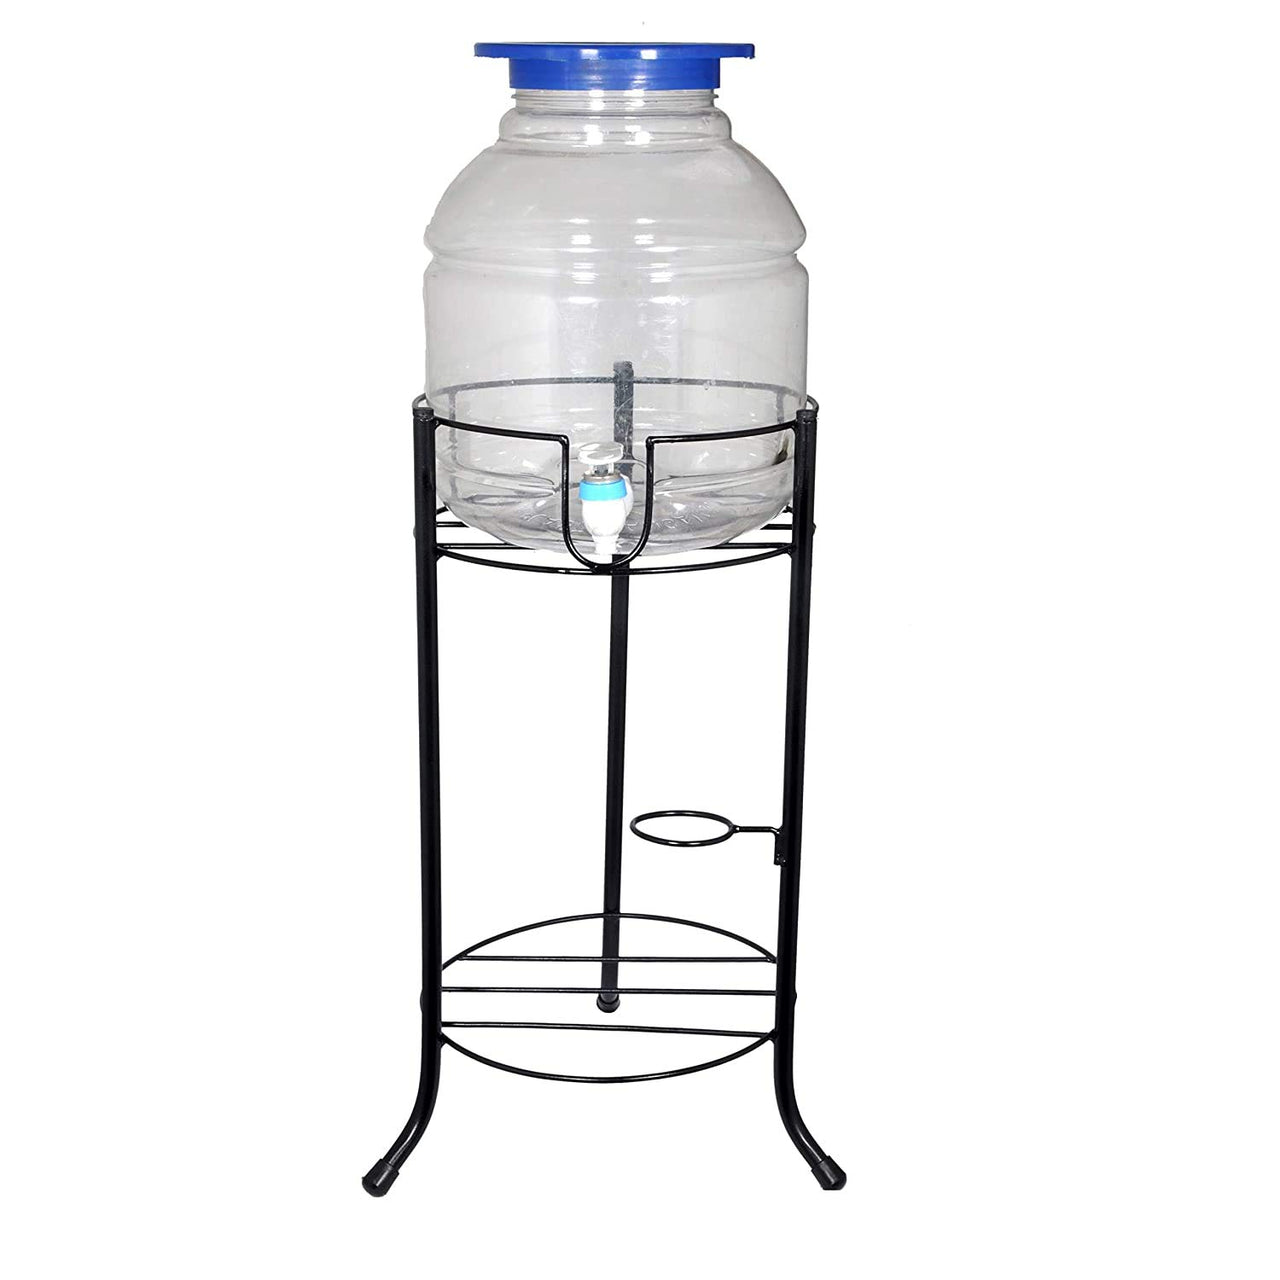 Metal Water Dispenser Stand Bottle Holder Water Pot/Can Holder for Kitchen Home Office Schools Hospitals - 30 L Dime Store